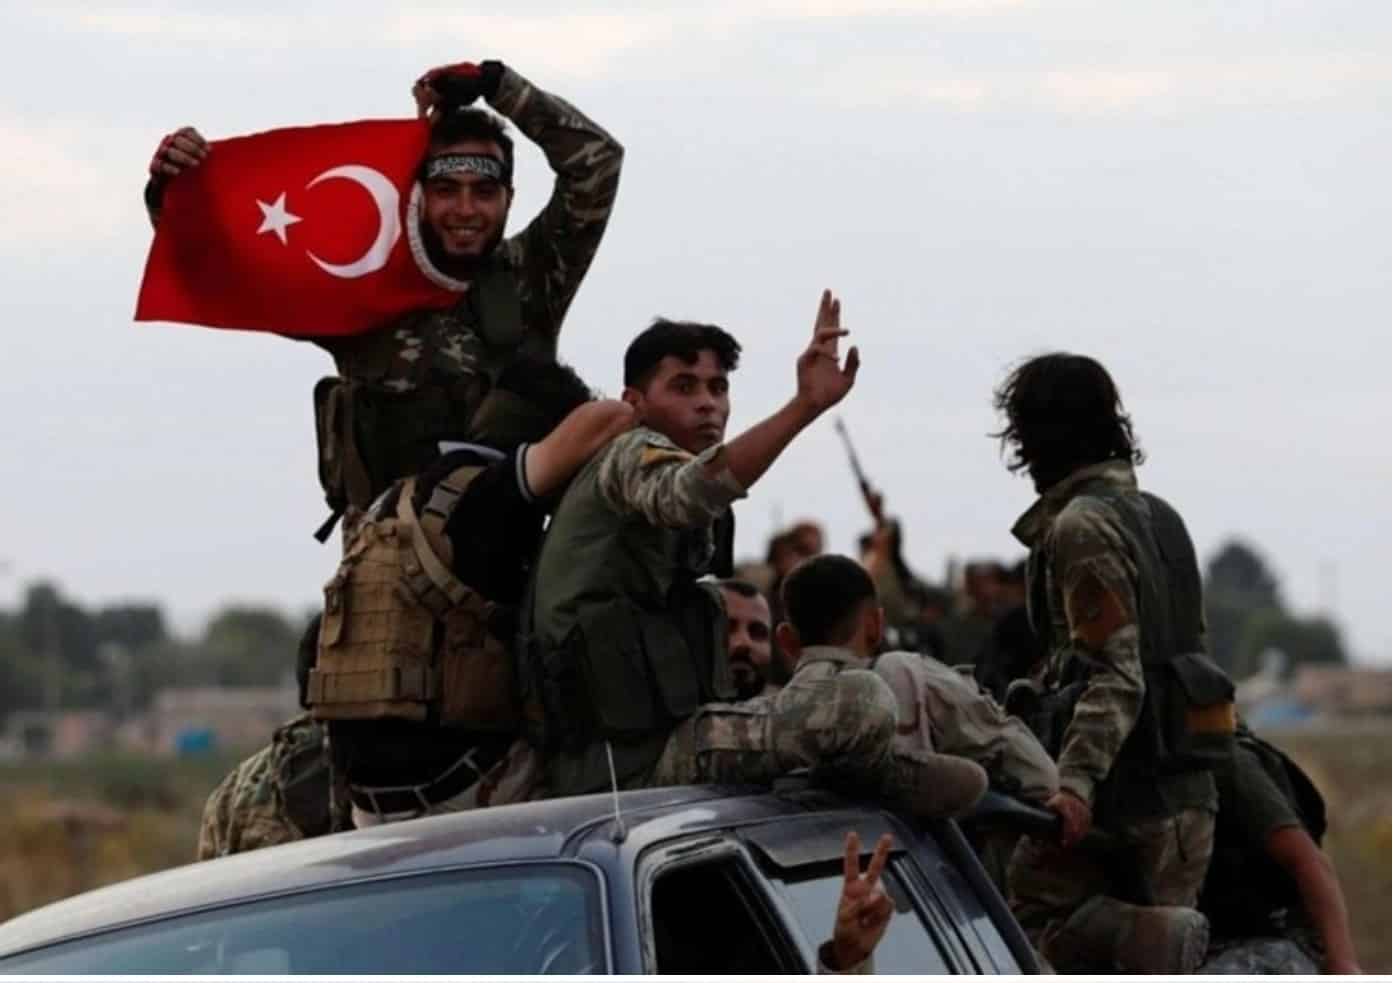 Turkey’s War on Russia: Joint Turkish/Ukie Military Group Recruiting Terrorists from Syria for Jihad on Russian Christians